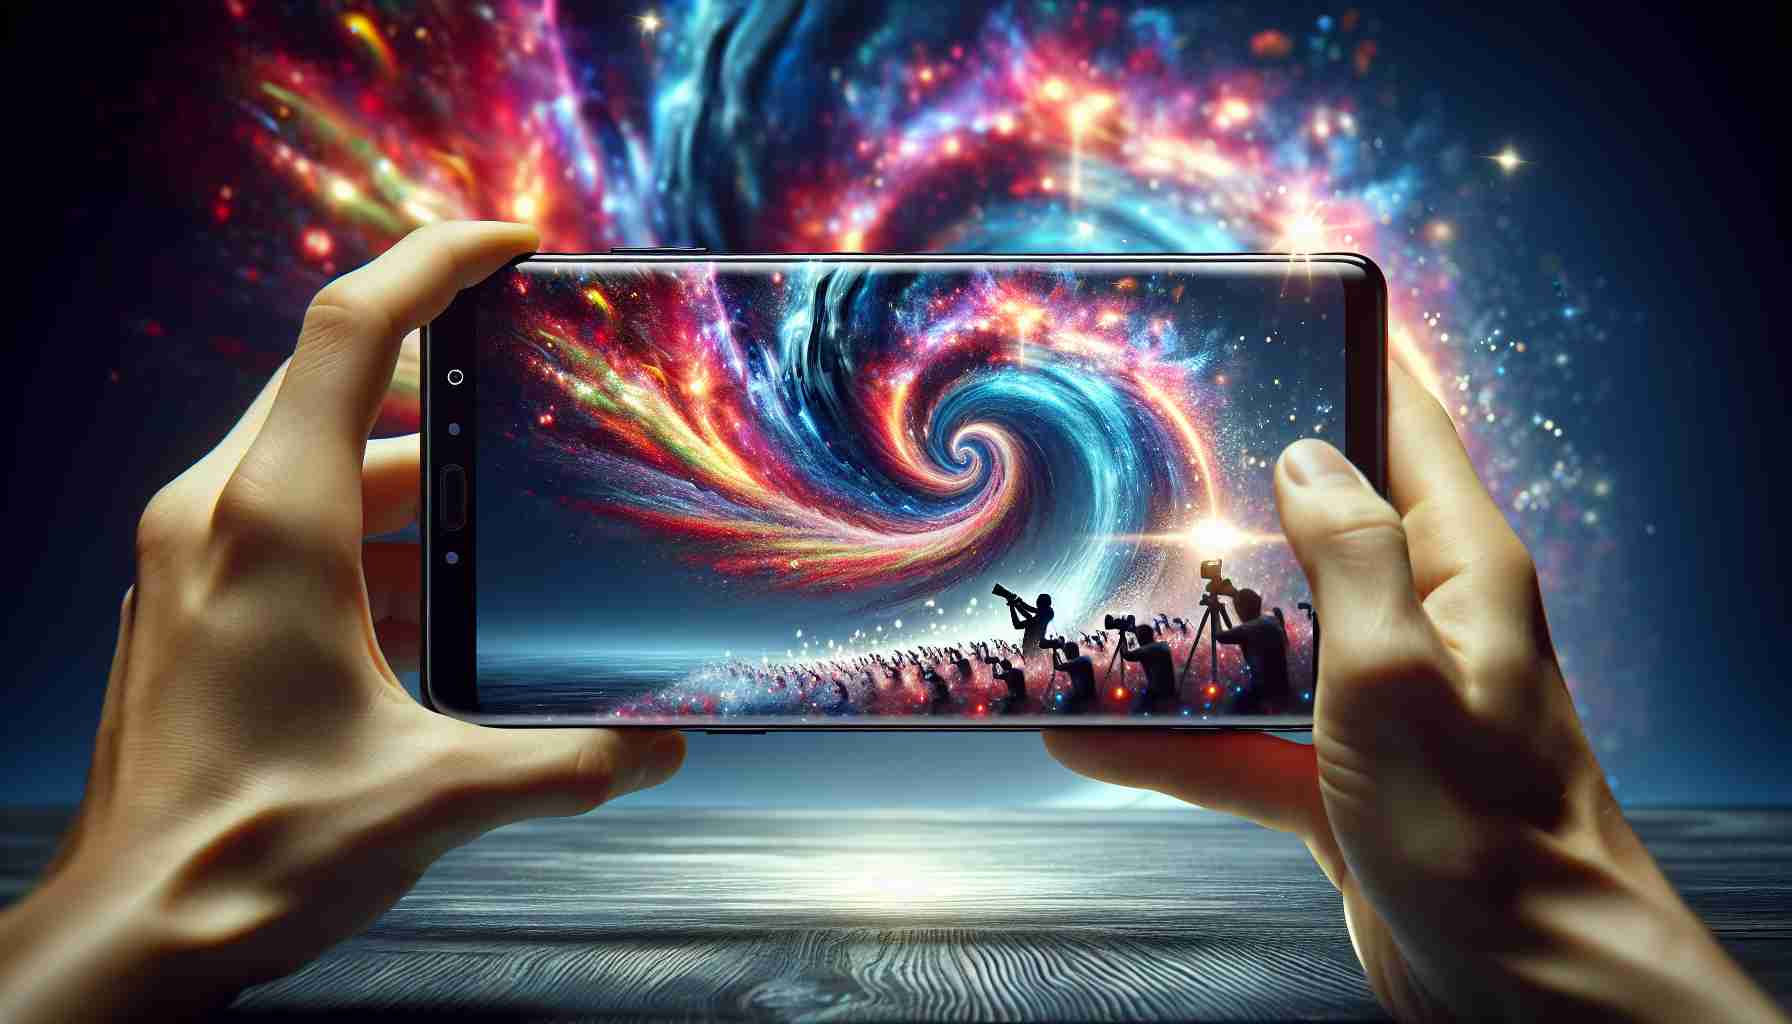 A high-resolution, highly realistic image of a scene where photographers are capturing a dazzling and mesmerizing shot that triggers a whirlwind of excitement and flurry on Android smartphones. Show the vibrant colors and active elements of the shot causing the apps on the phones to be in a frenzy, showcasing the influence of the stunning photo. Express the chaos subtly using visual metaphors, such as swirling patterns and surges of light from the smartphones screen. However, ensure not to depict any brand logo.